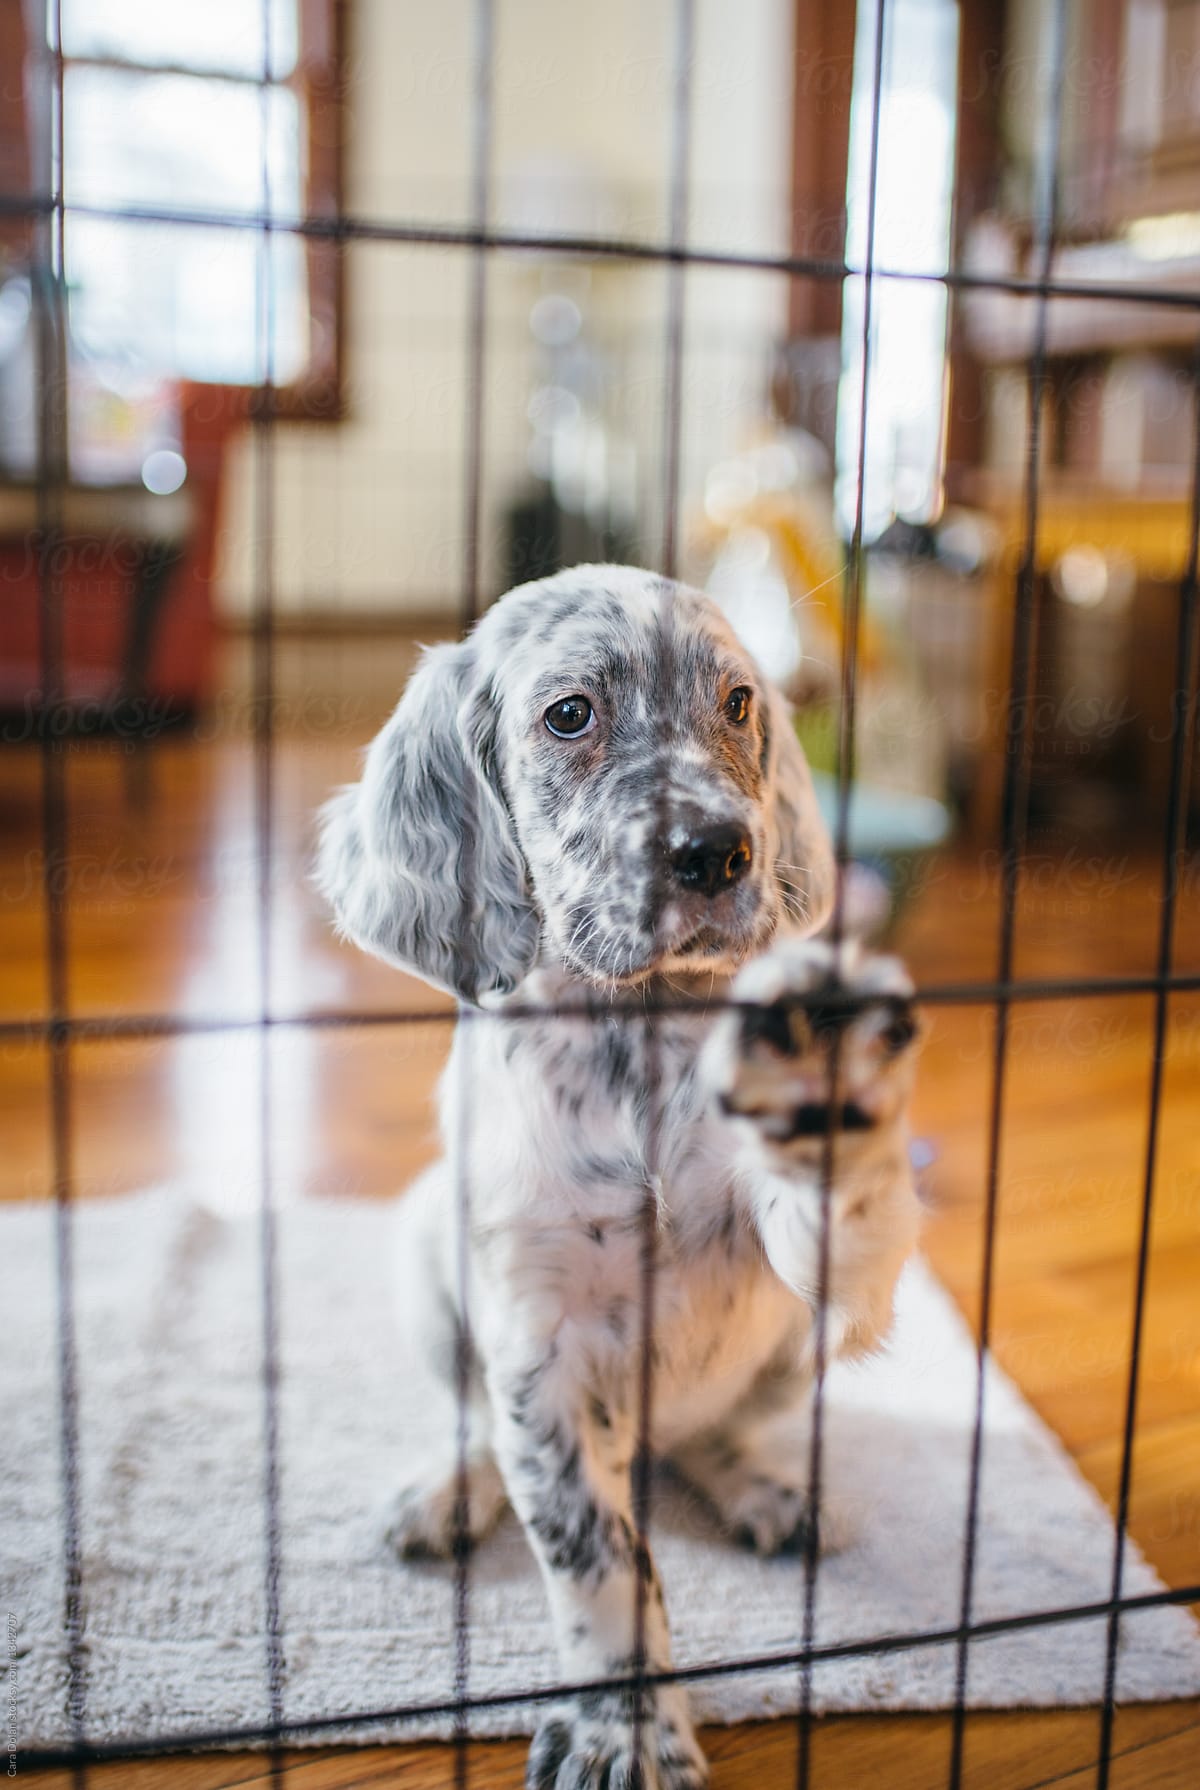 Young English setter puppy in a dog pen